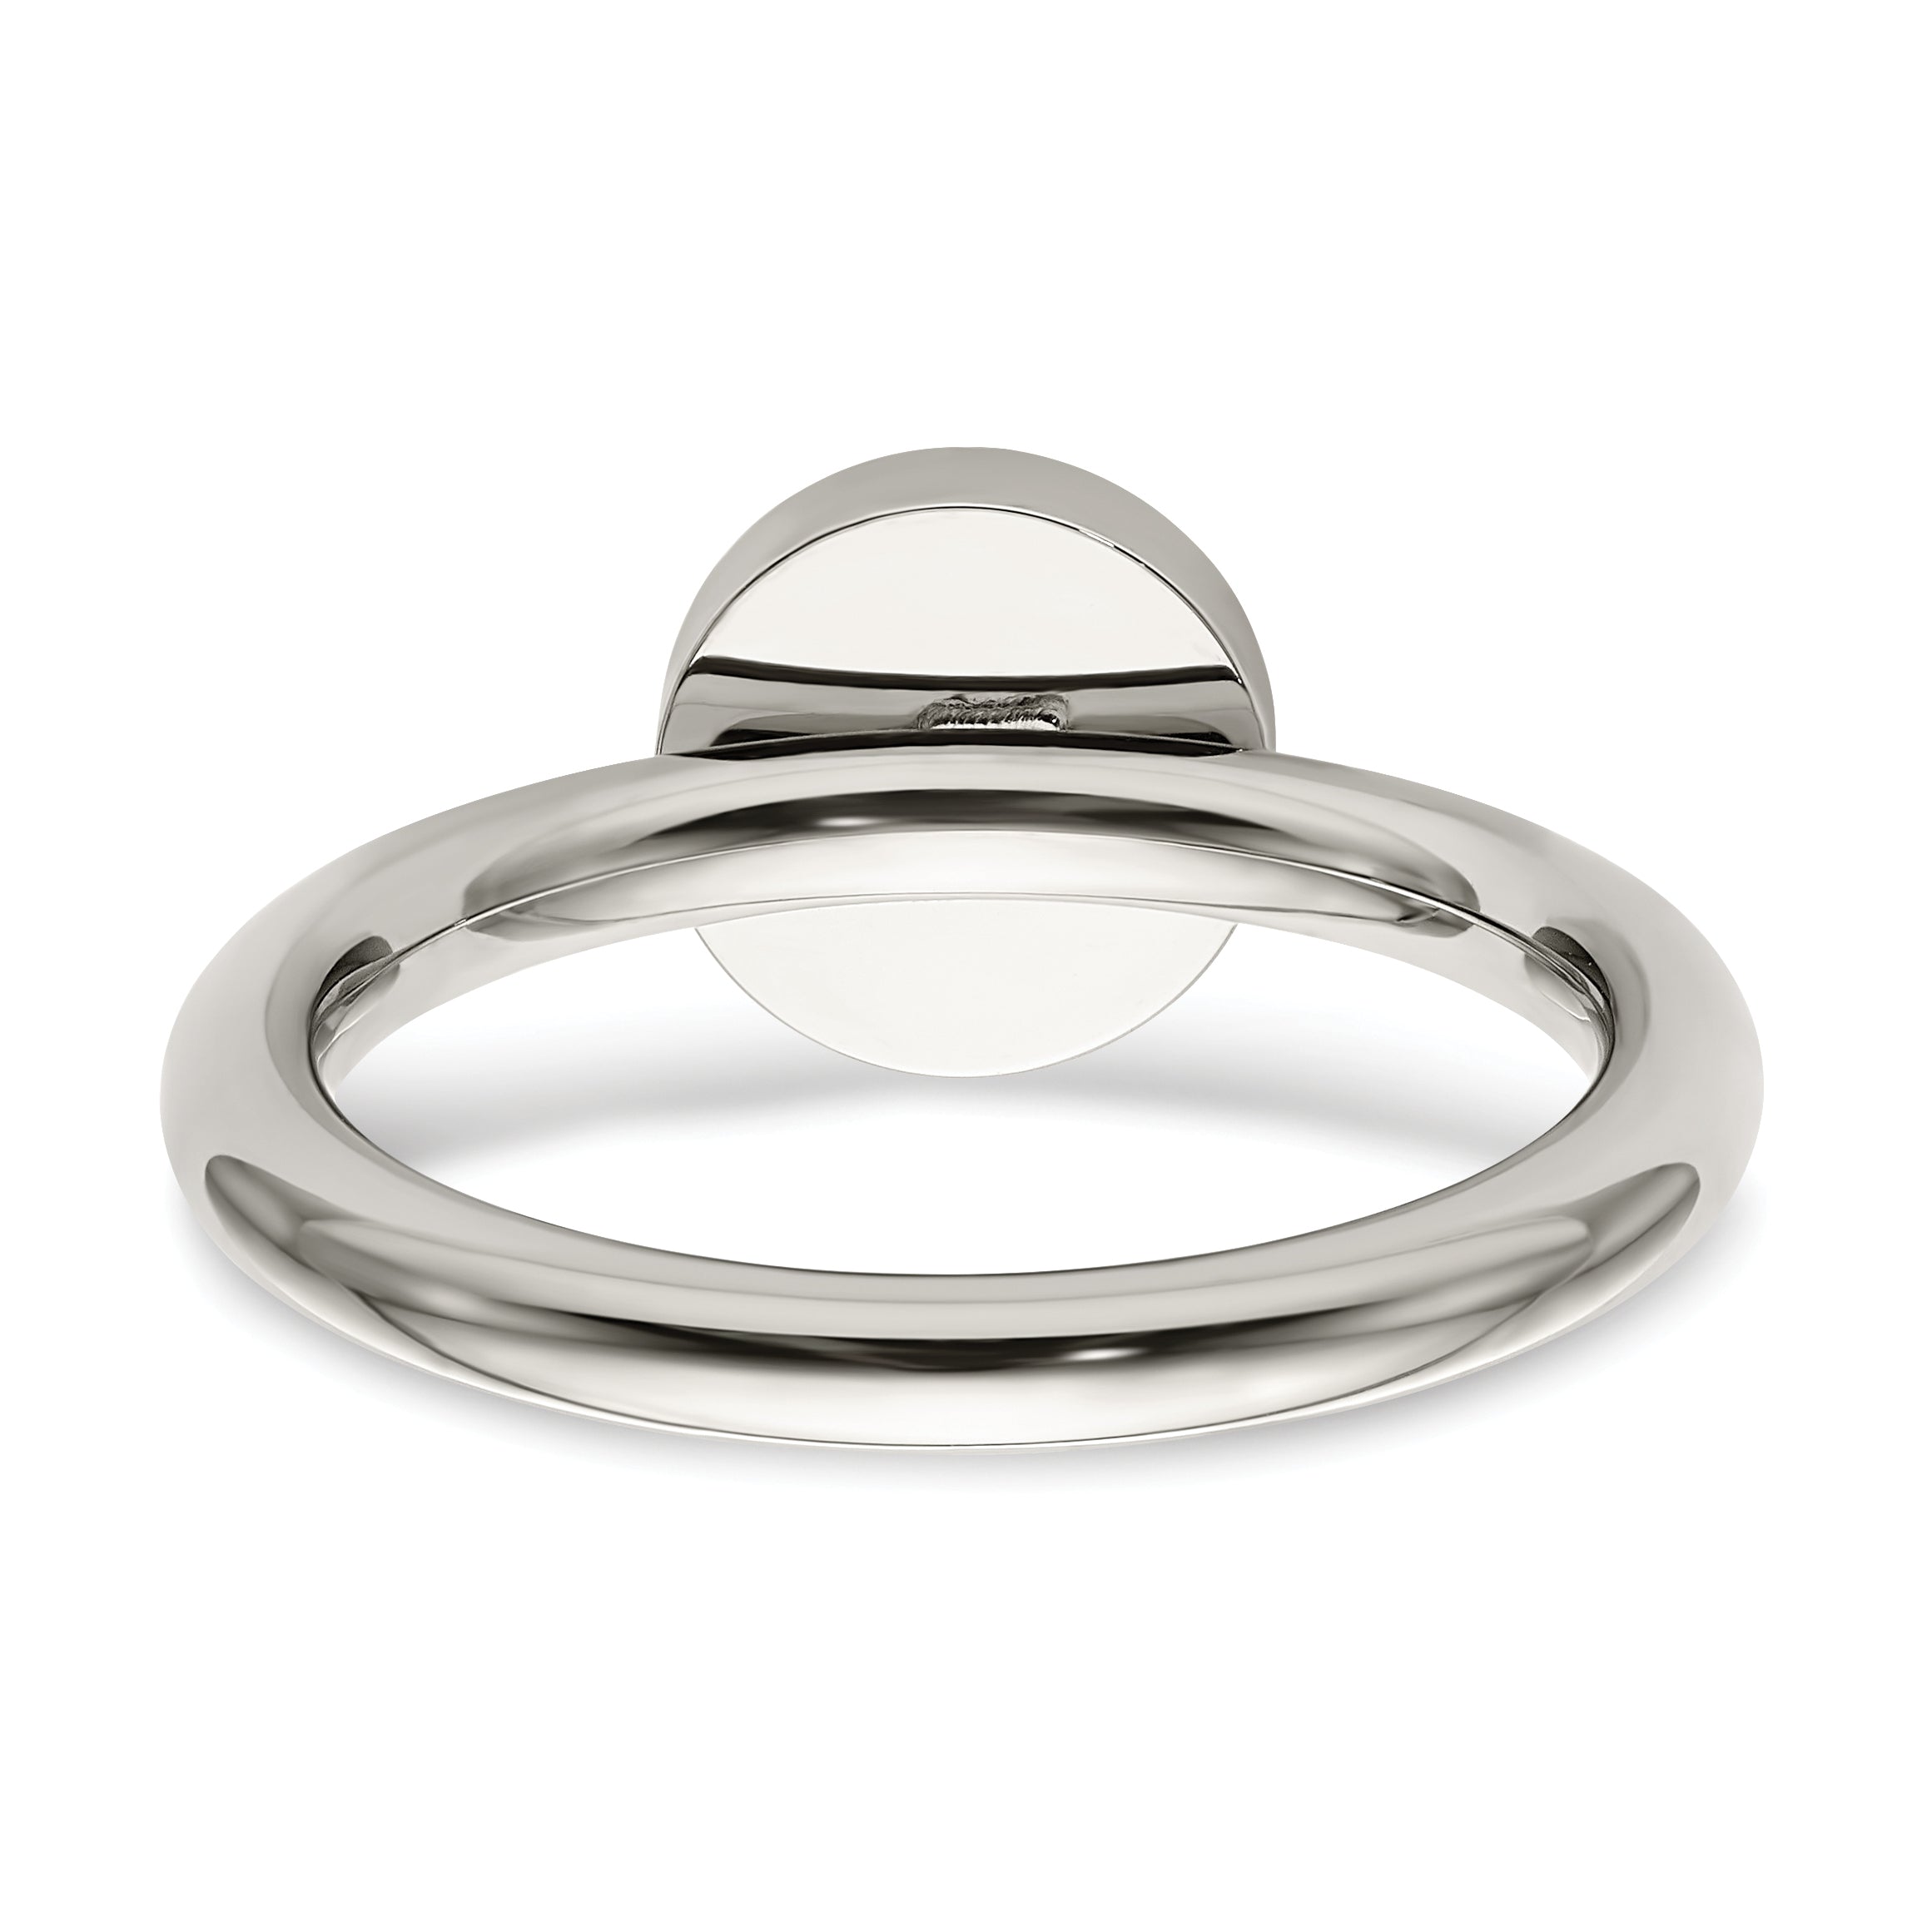 Stainless Steel Polished with CZ Circle Ring